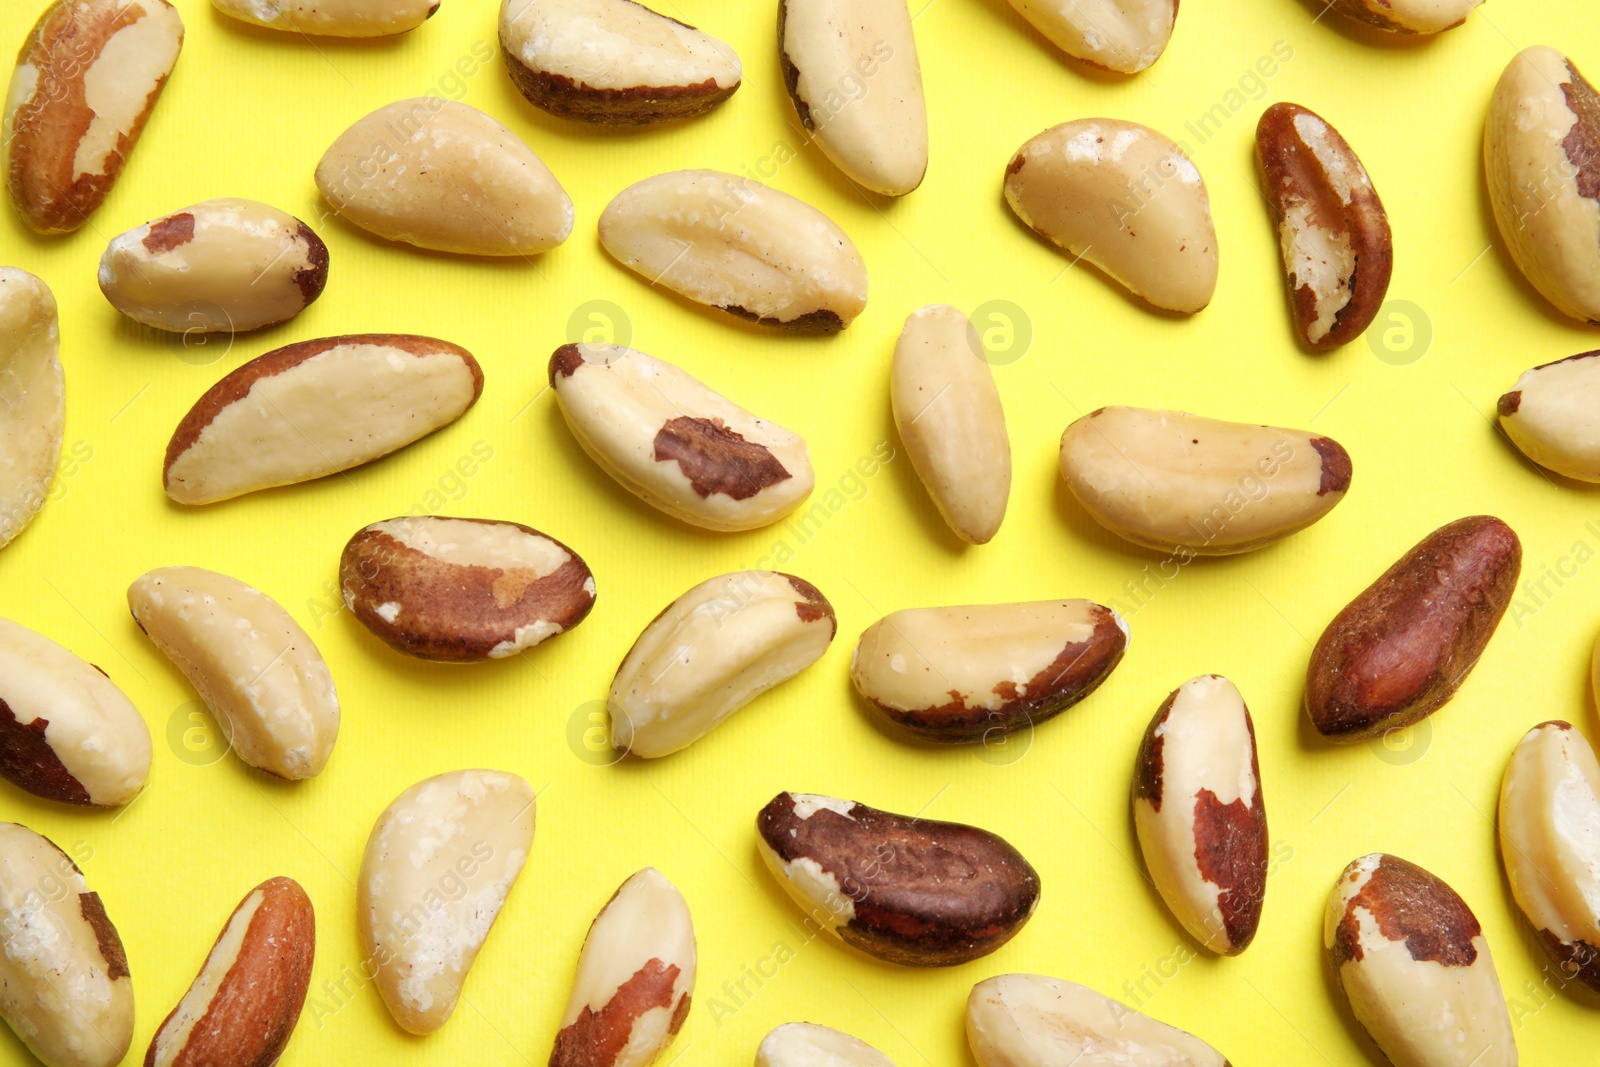 Photo of Flat lay composition with Brazil nuts on color background